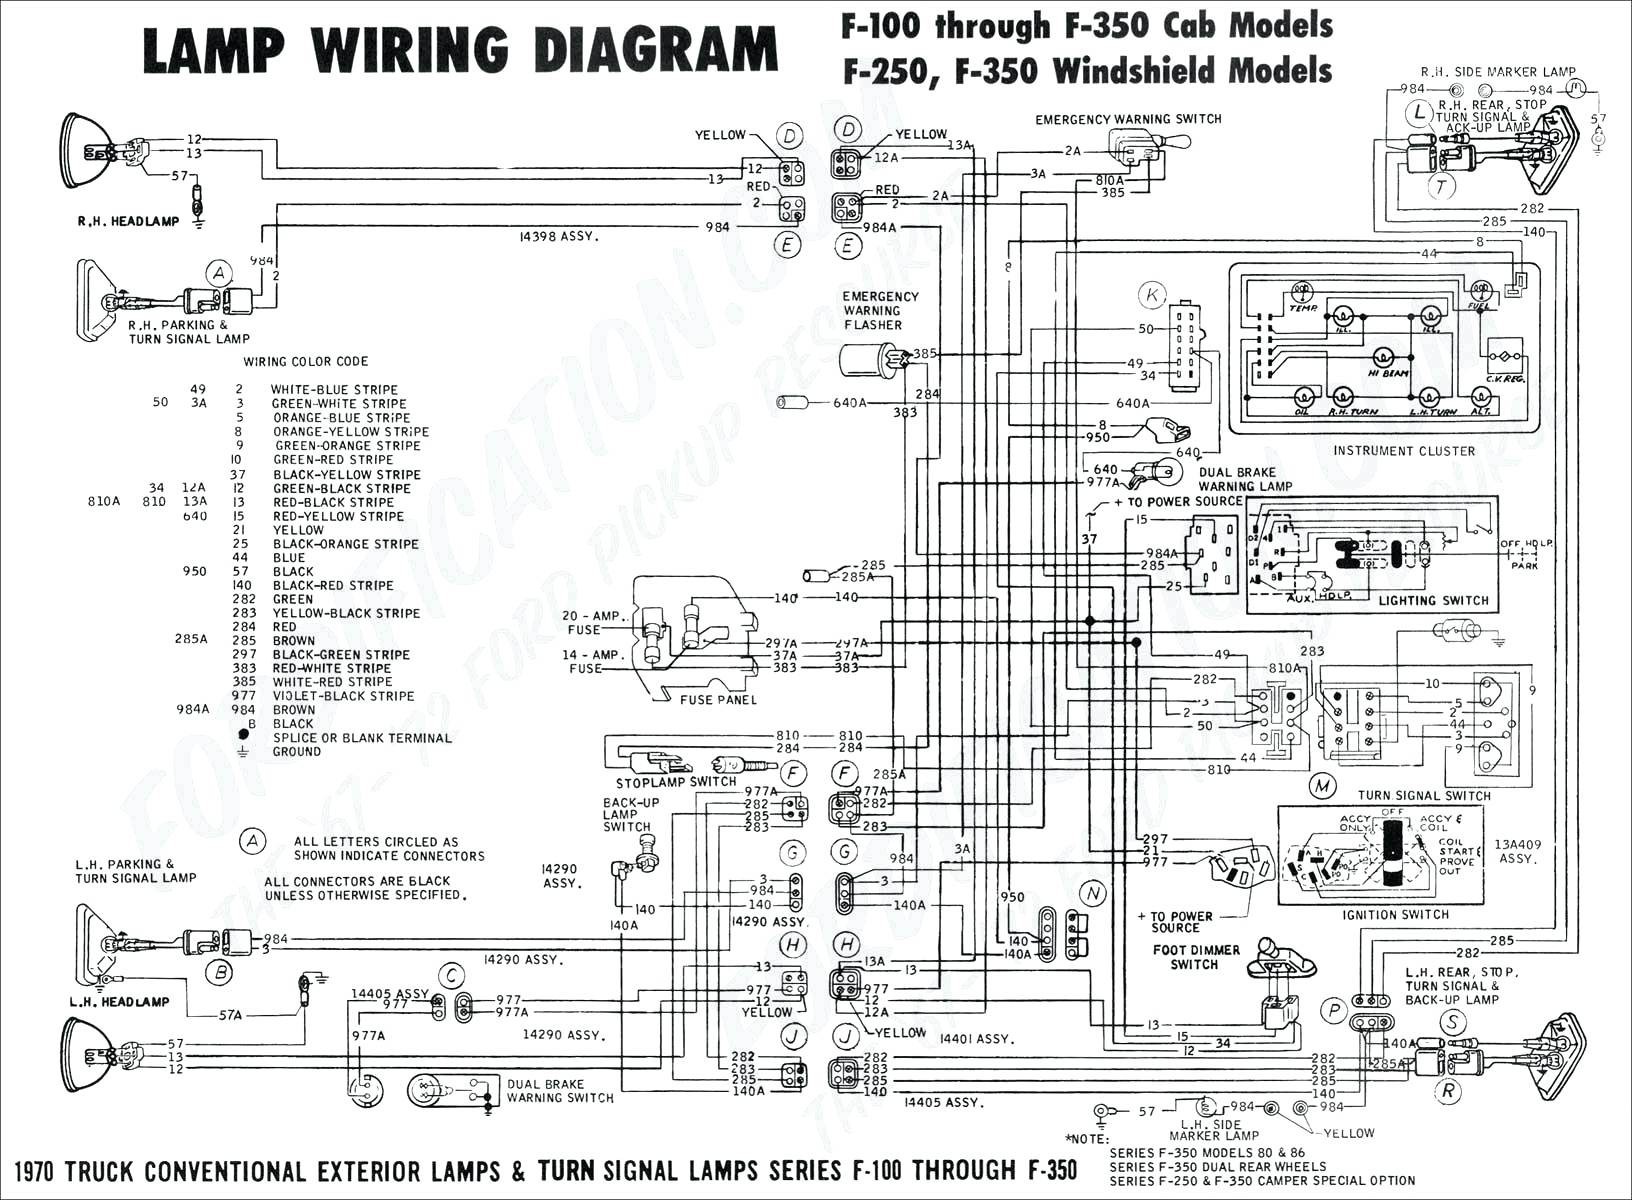 2005 ford F150 Trailer Wiring Diagram ford F150 Trailer Wiring Harness Diagram Inspirational ford F150